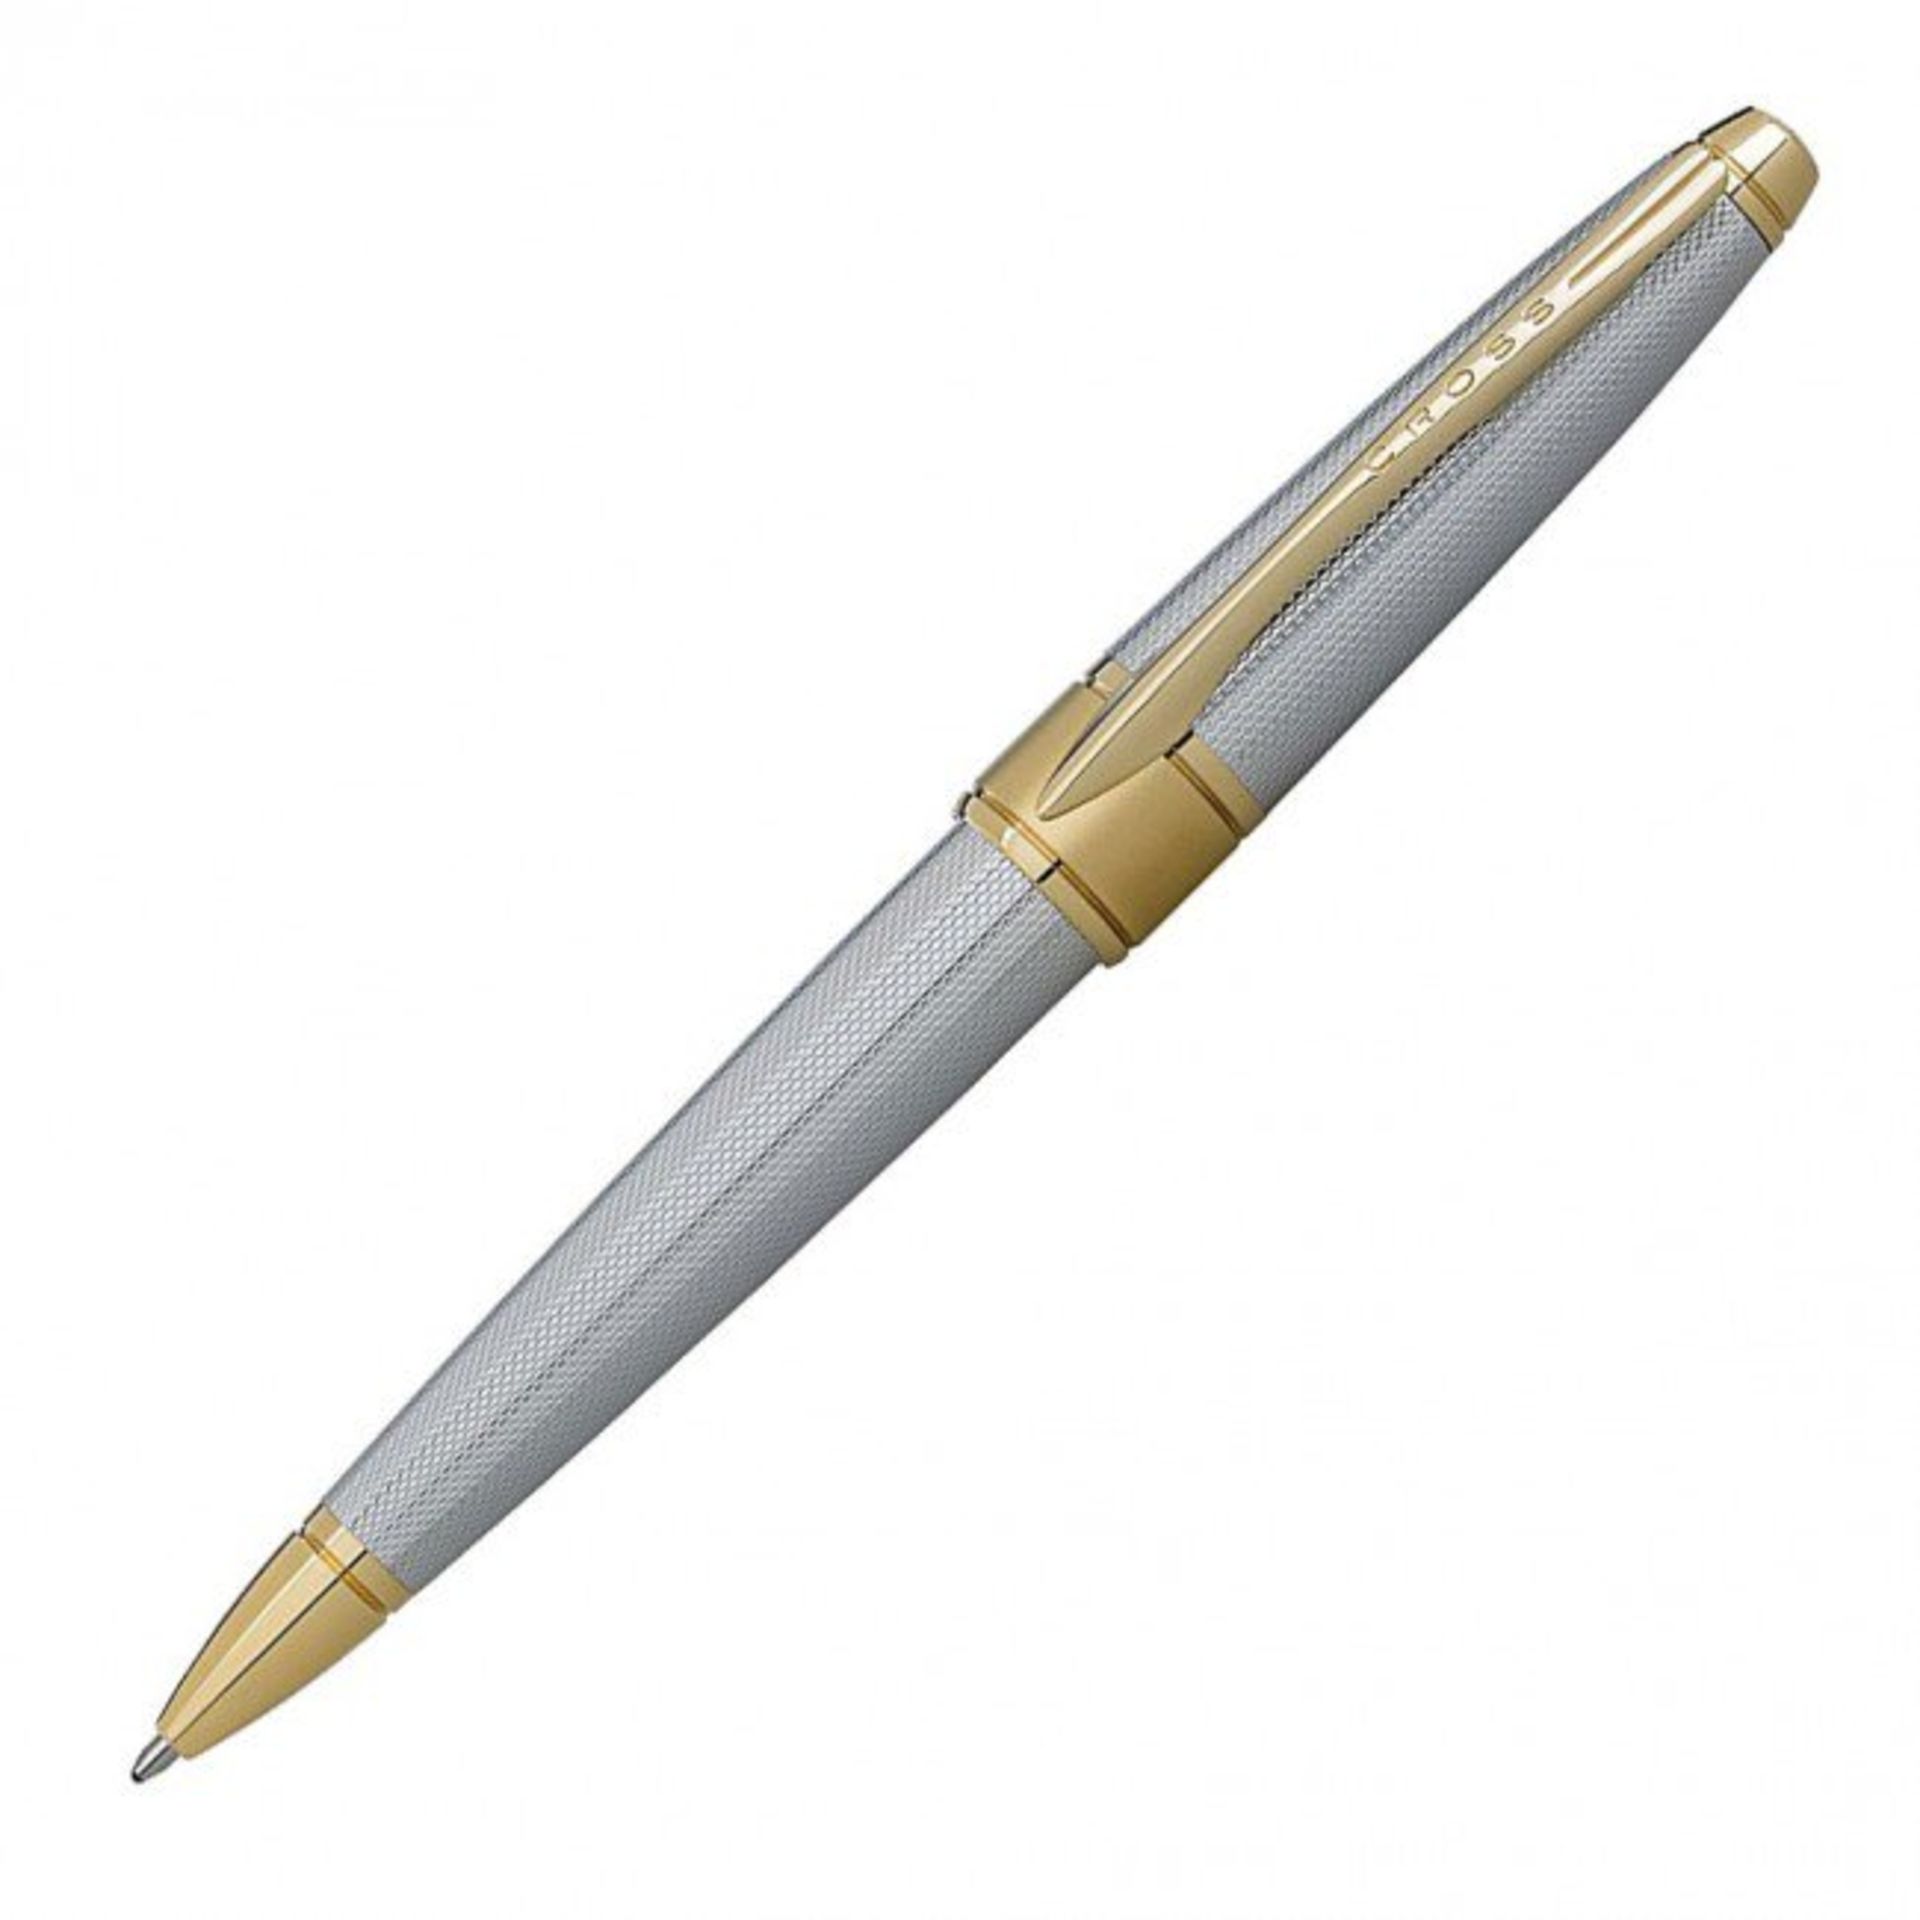 V Brand New Cross Apogee Rollerball Pen Chrome And Gold Plate In Luxury Gift Box RRP£80.00